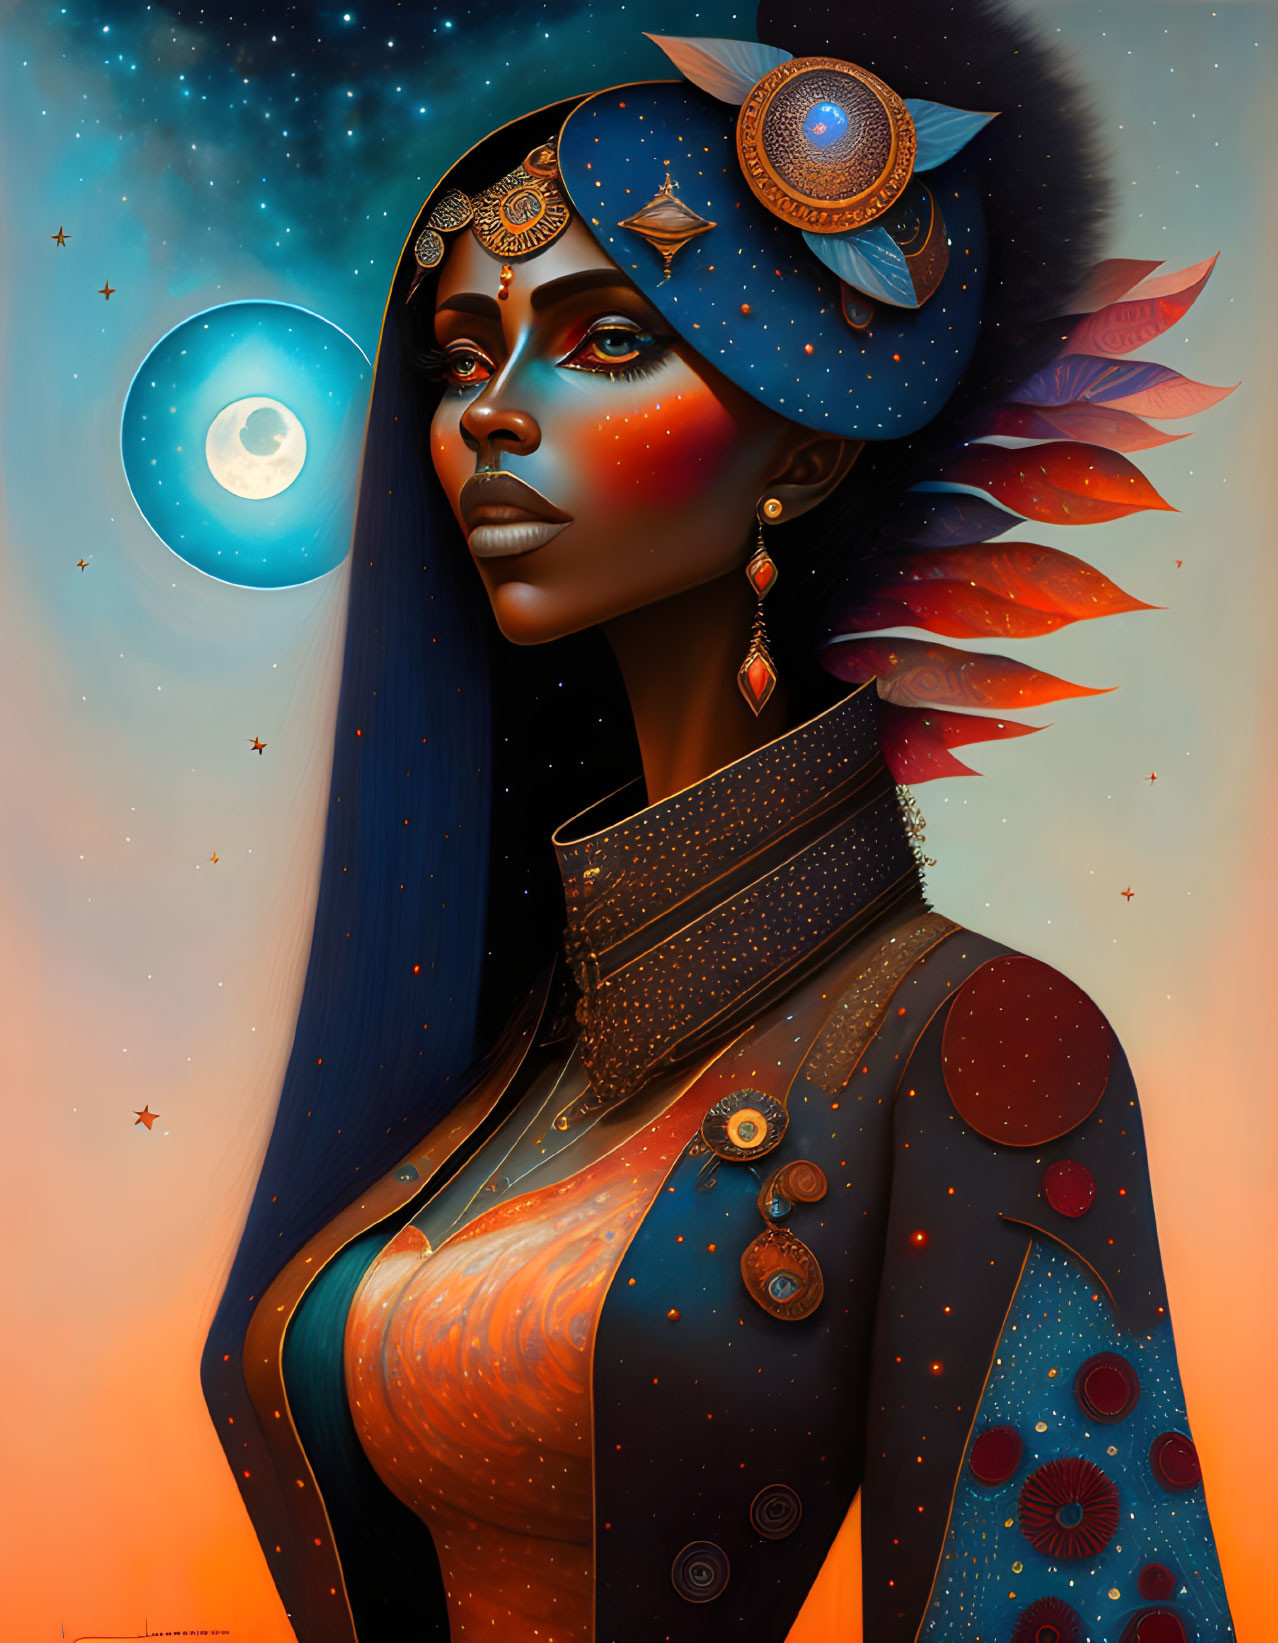 Celestial-themed woman portrait with stars, moon, and cosmic colors